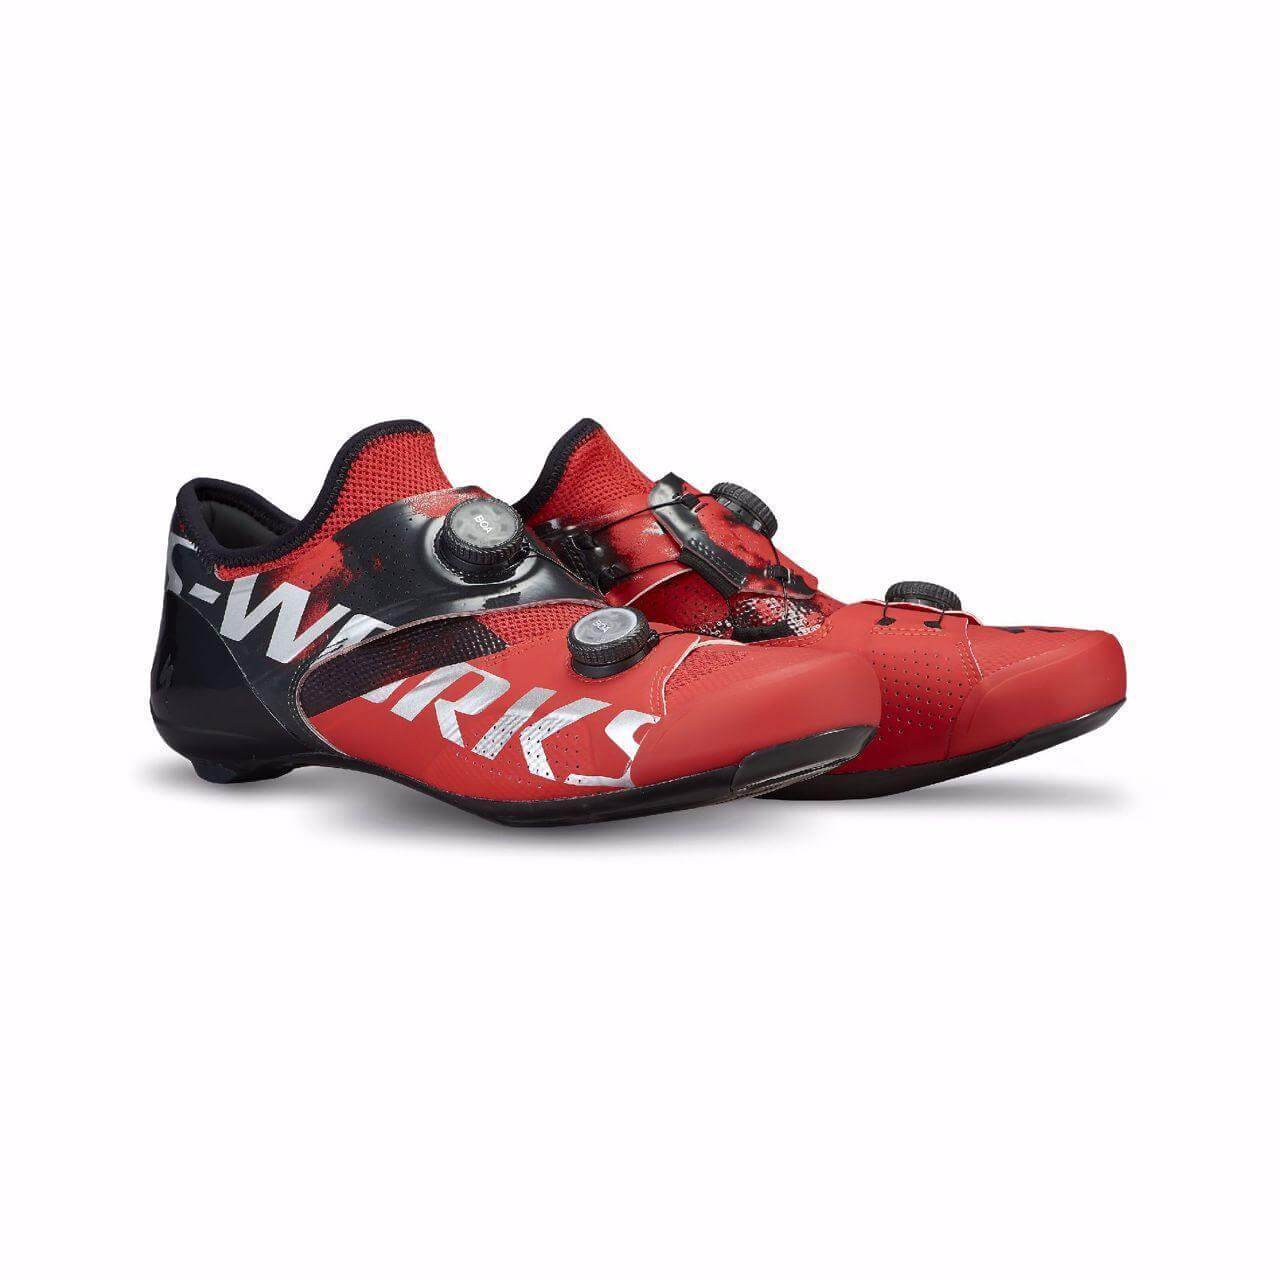 S-Works Ares Road Shoe